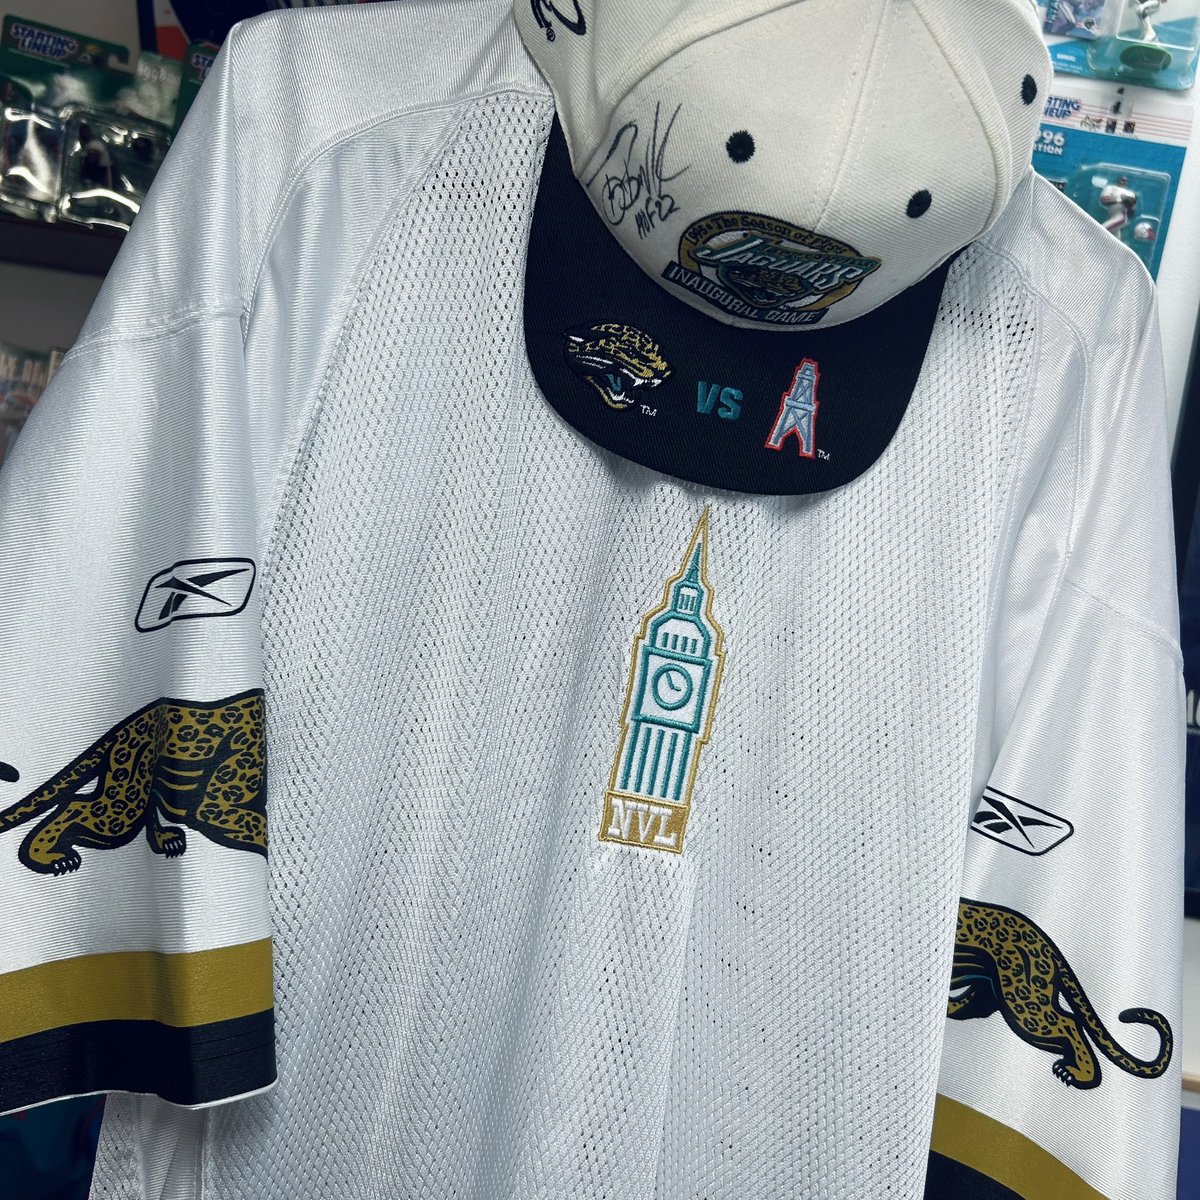 🐆Gameday fit… 👌NVL Custom & Inaugural Game Limited Edition Snapback signed by Jags HOF Legend @TonyBoselli 👀 💯Ready for Sunday! @JaguarsUKandIE @Jaguars